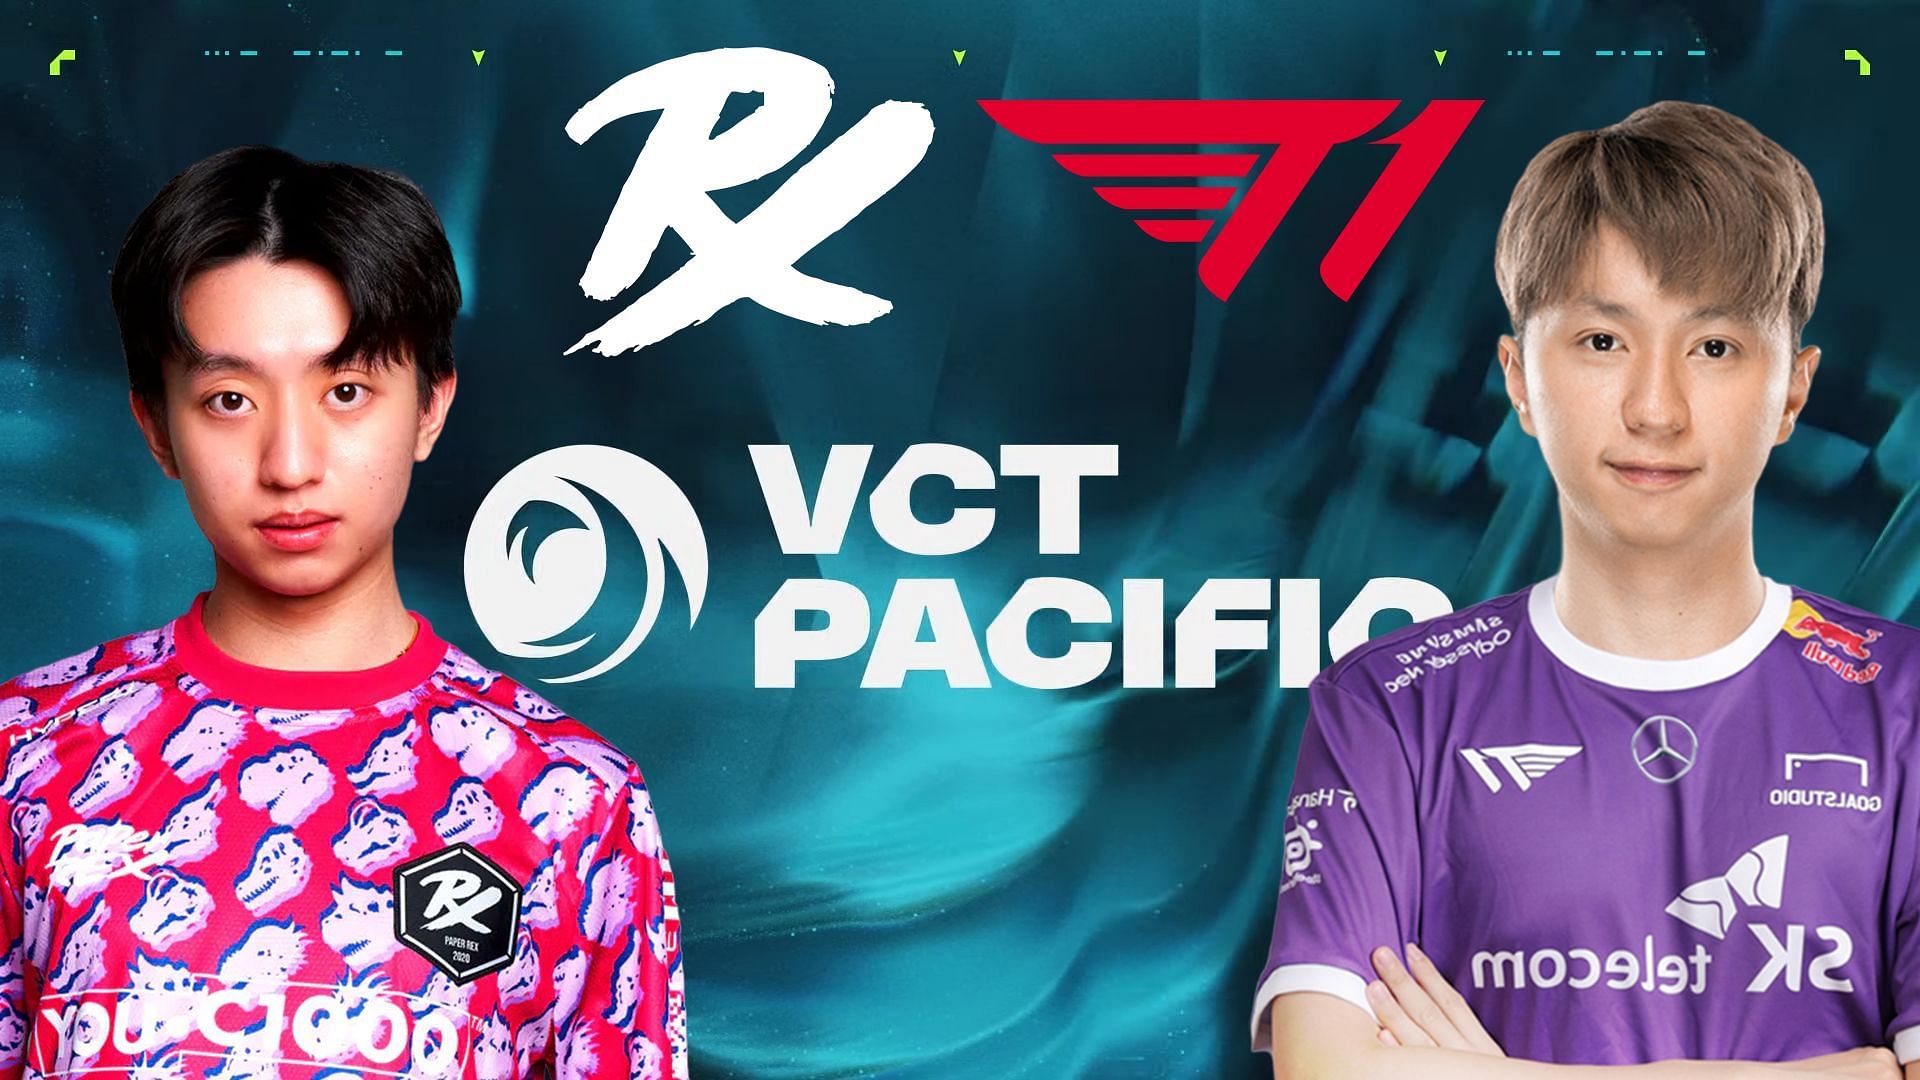 Paper Rex vs T1 at VCT Pacific Kickoff (Image via Riot Games, Paper Rex and T1)